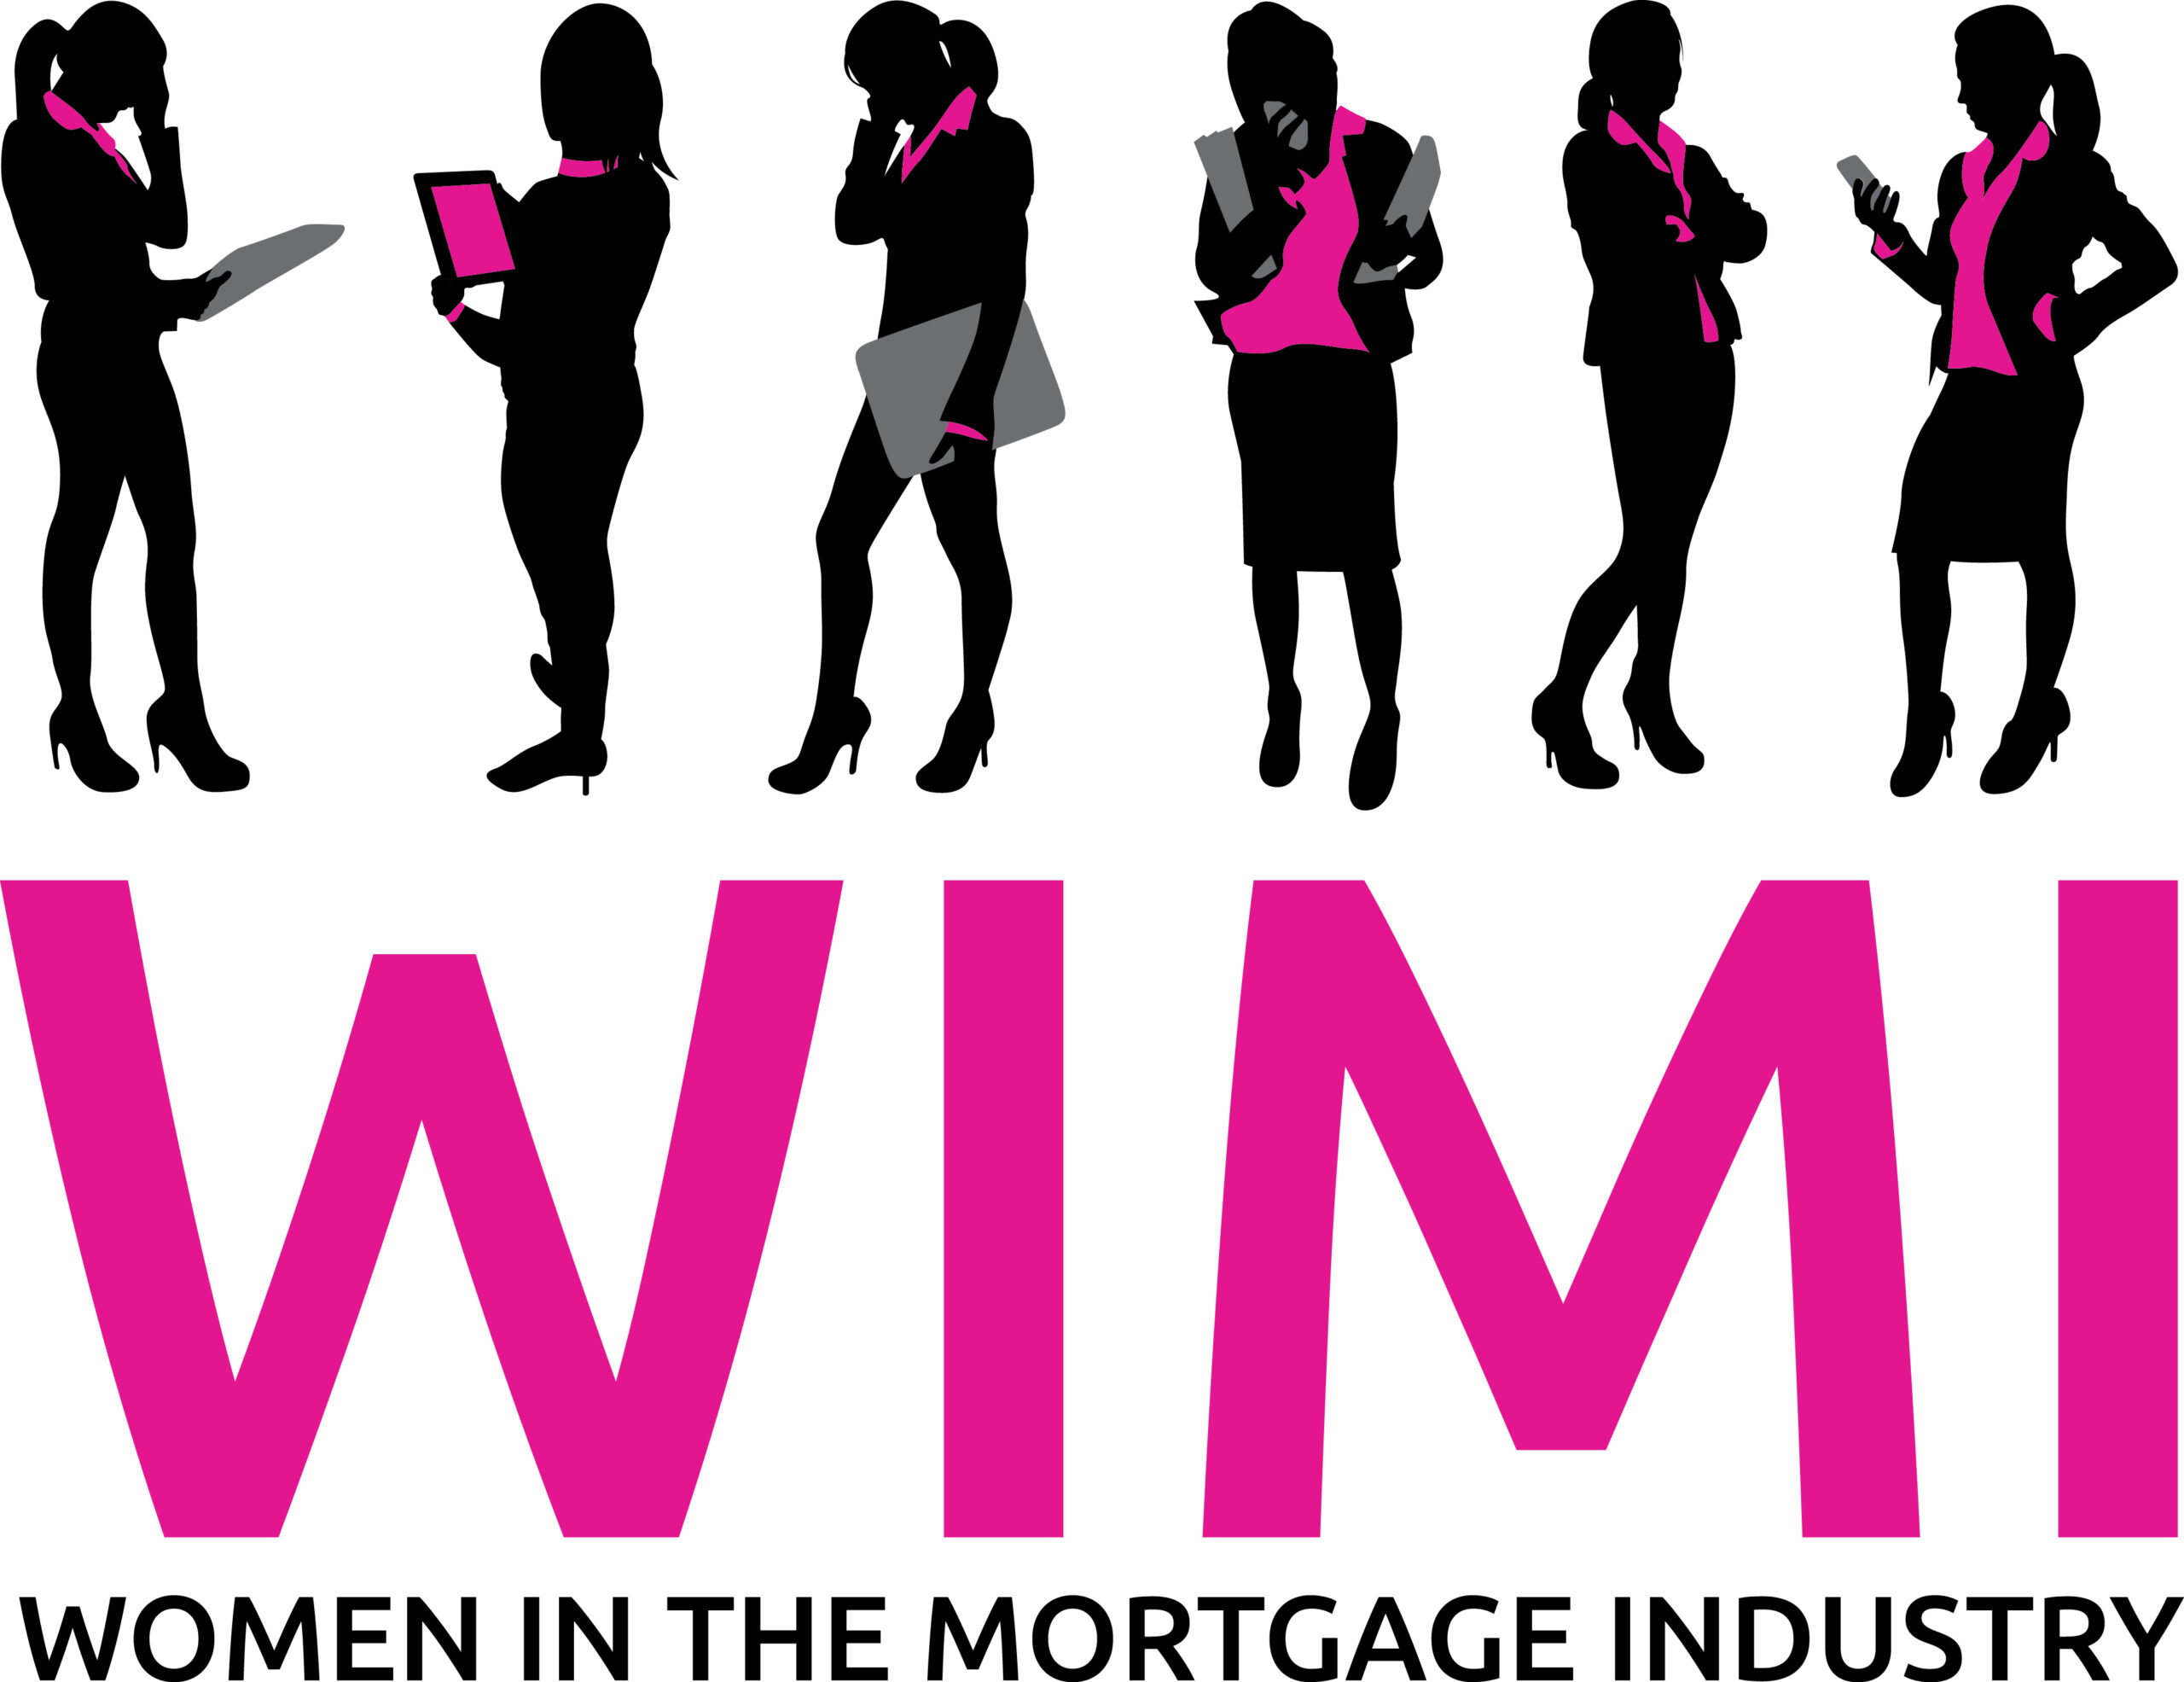 Women in the Mortgage Industry